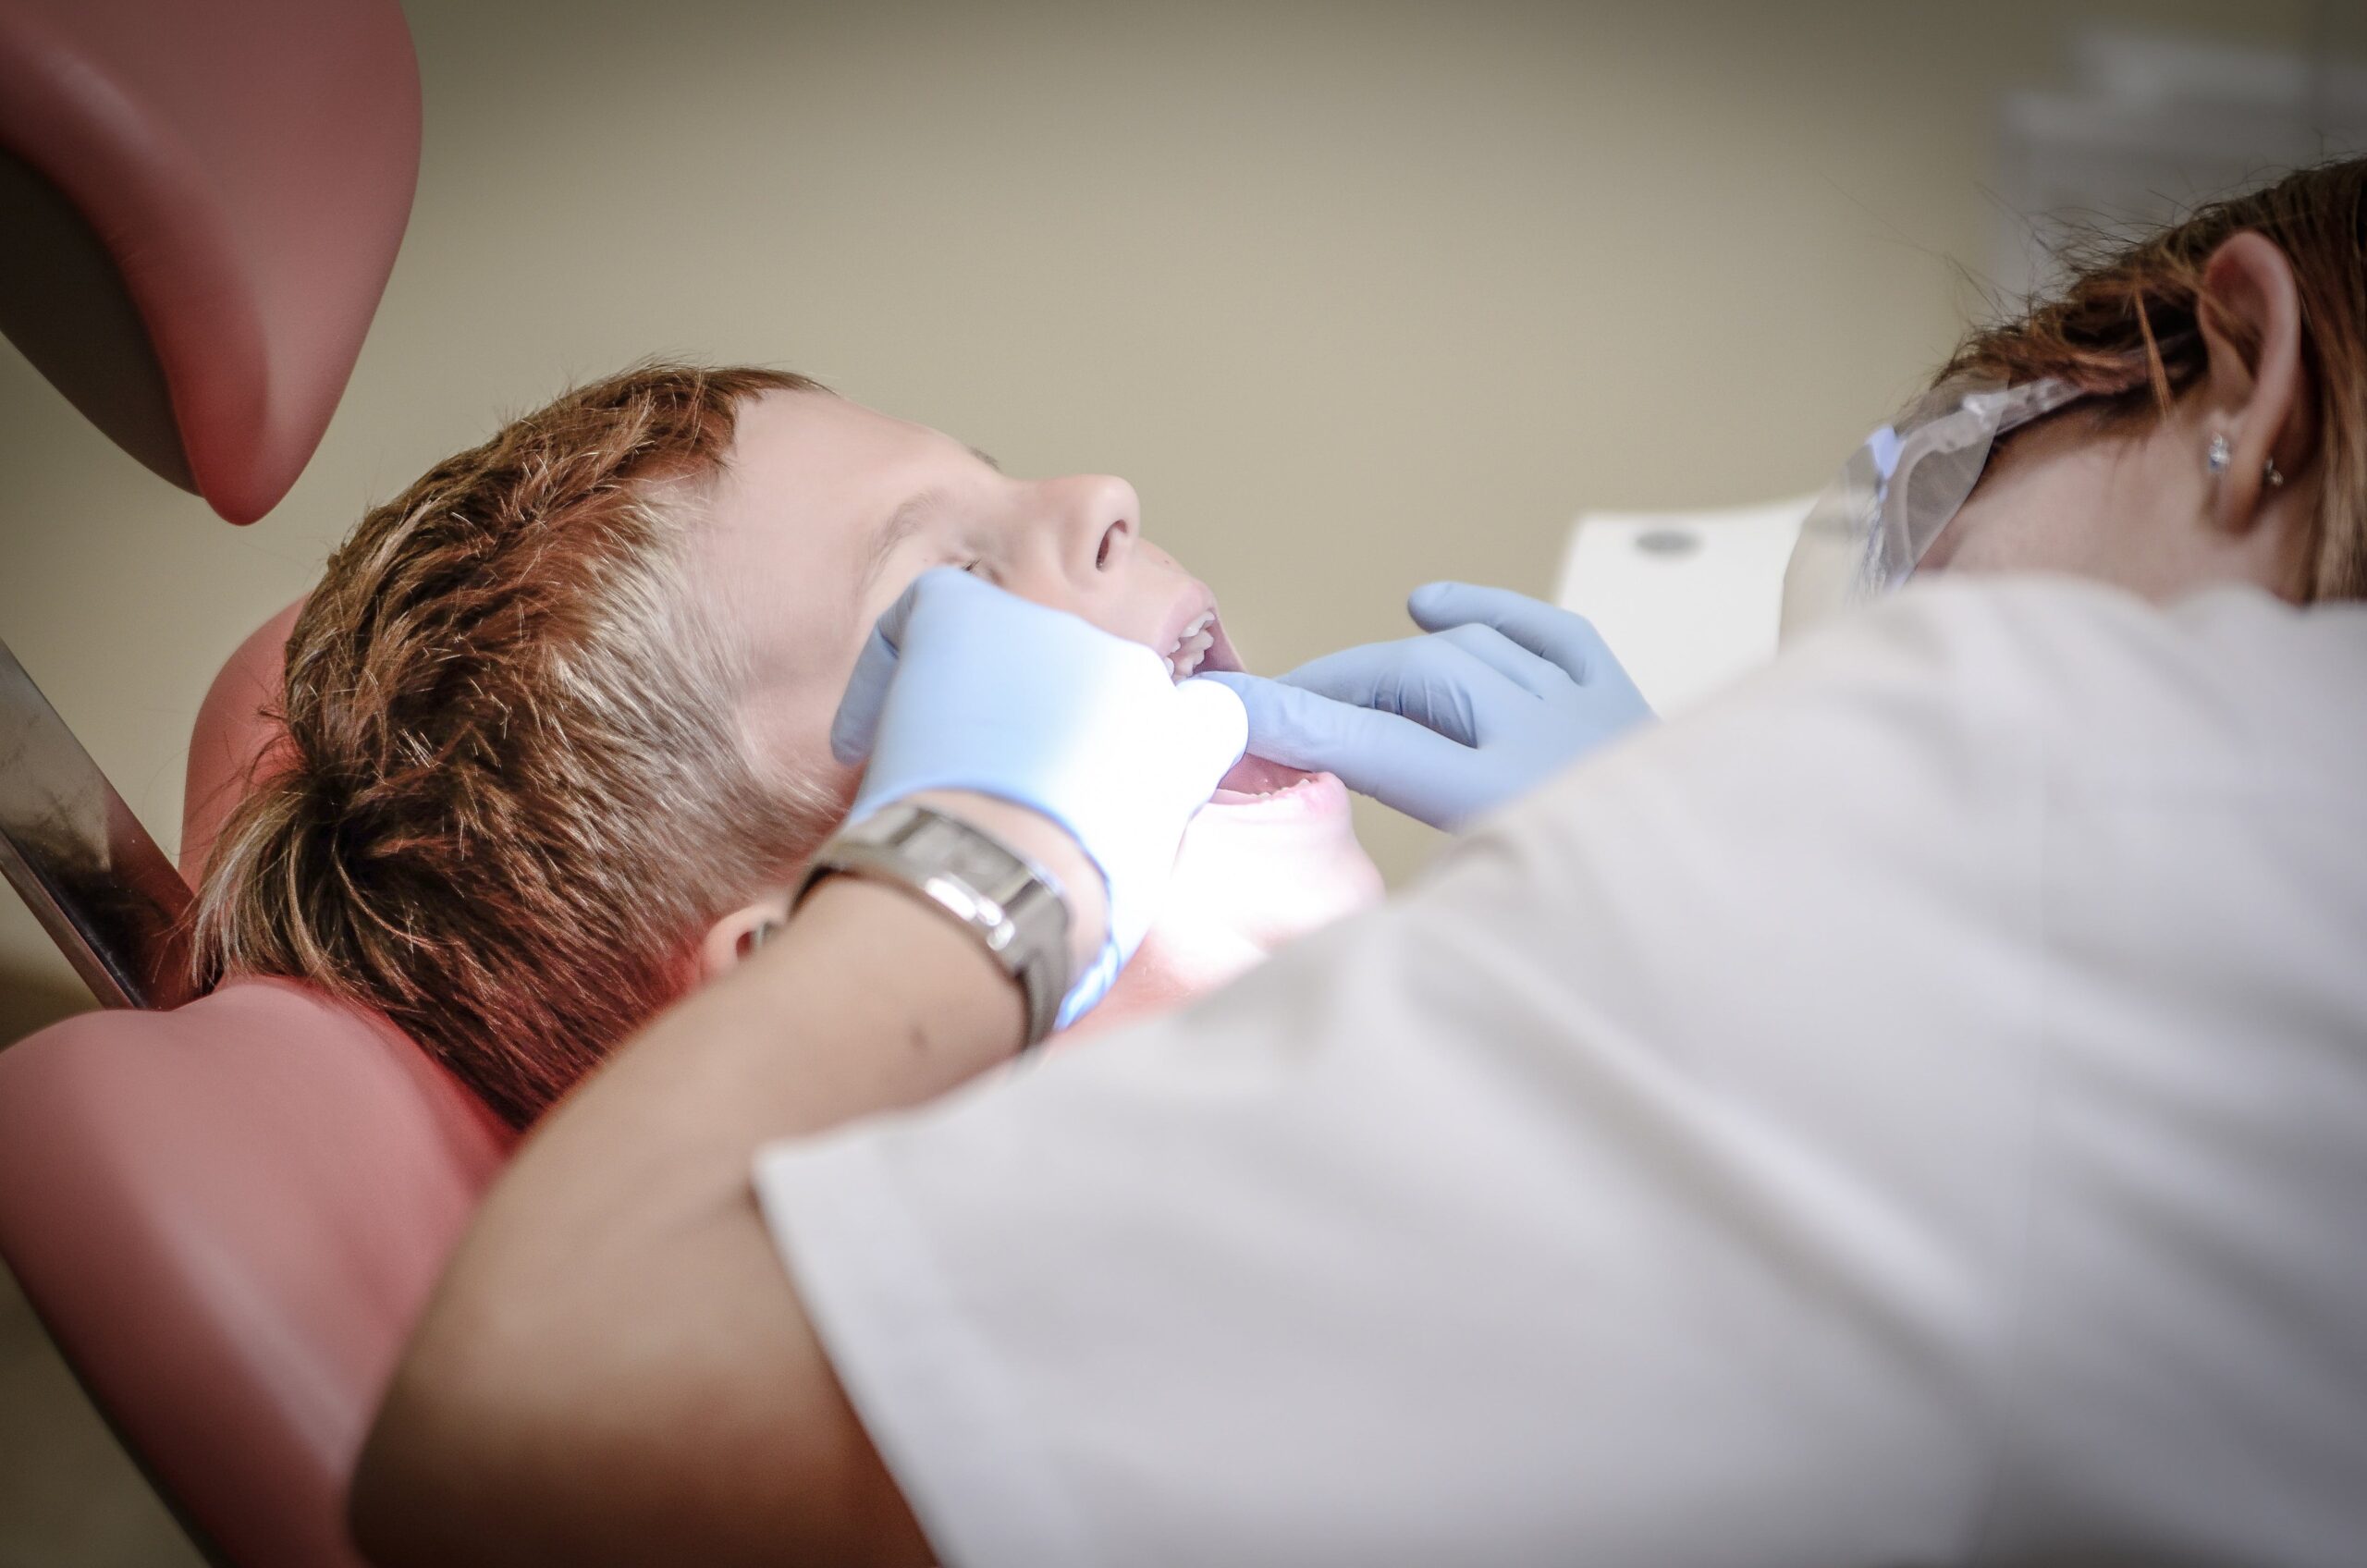 Emergency Dental Care: What to Do When You Need Urgent Dental Care?